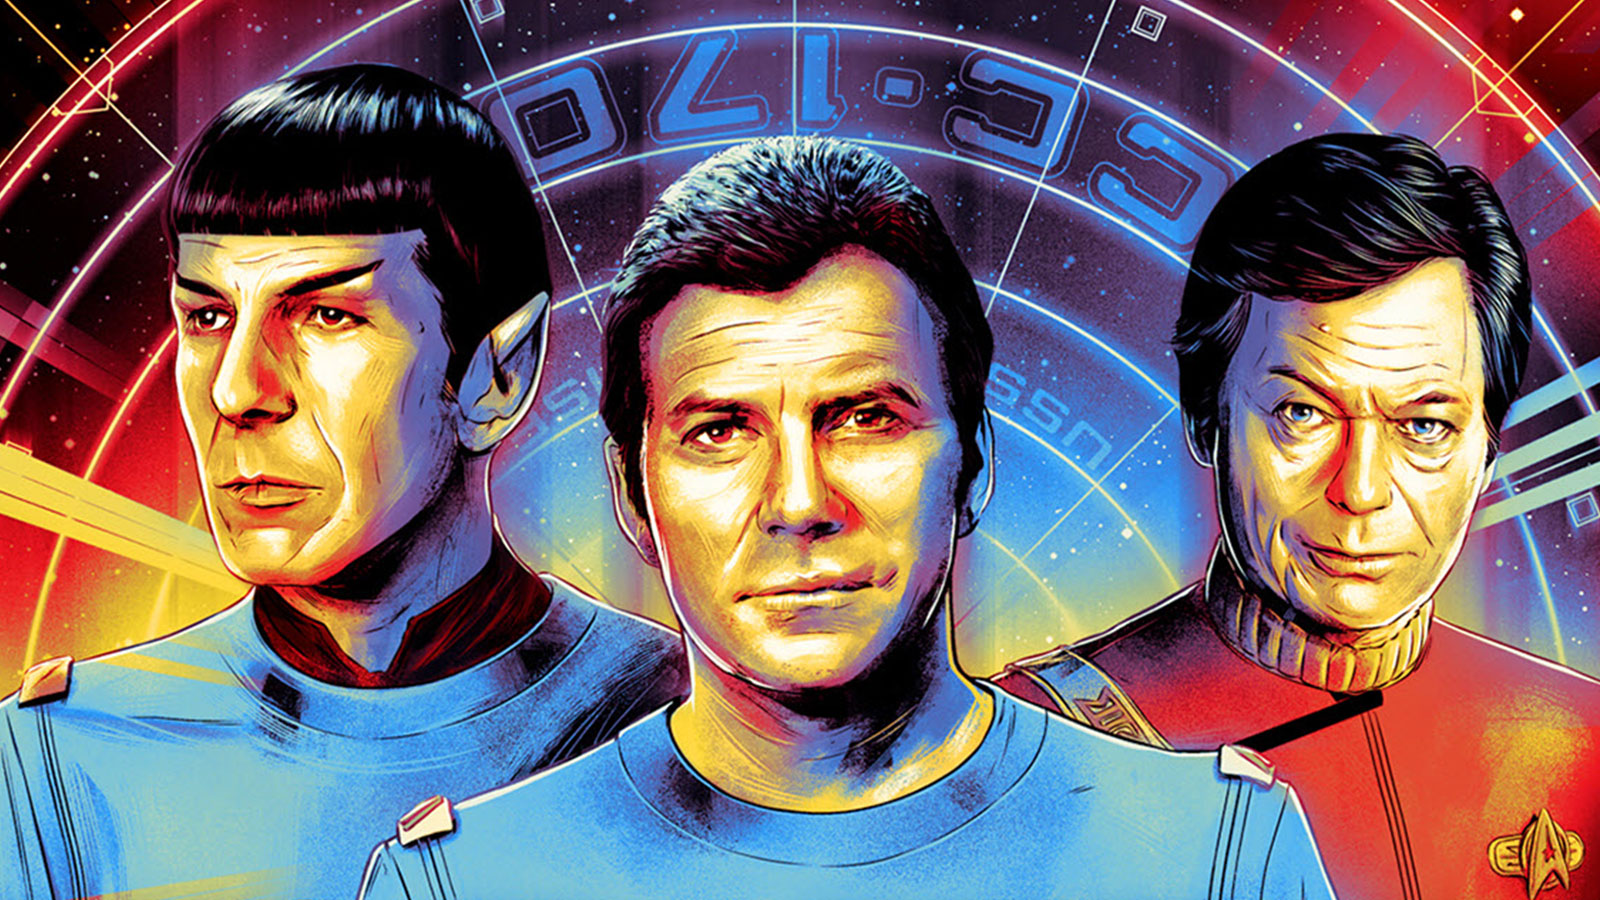 First Four Original Star Trek Films To Be Released In 4K Ultra HD Later This Year